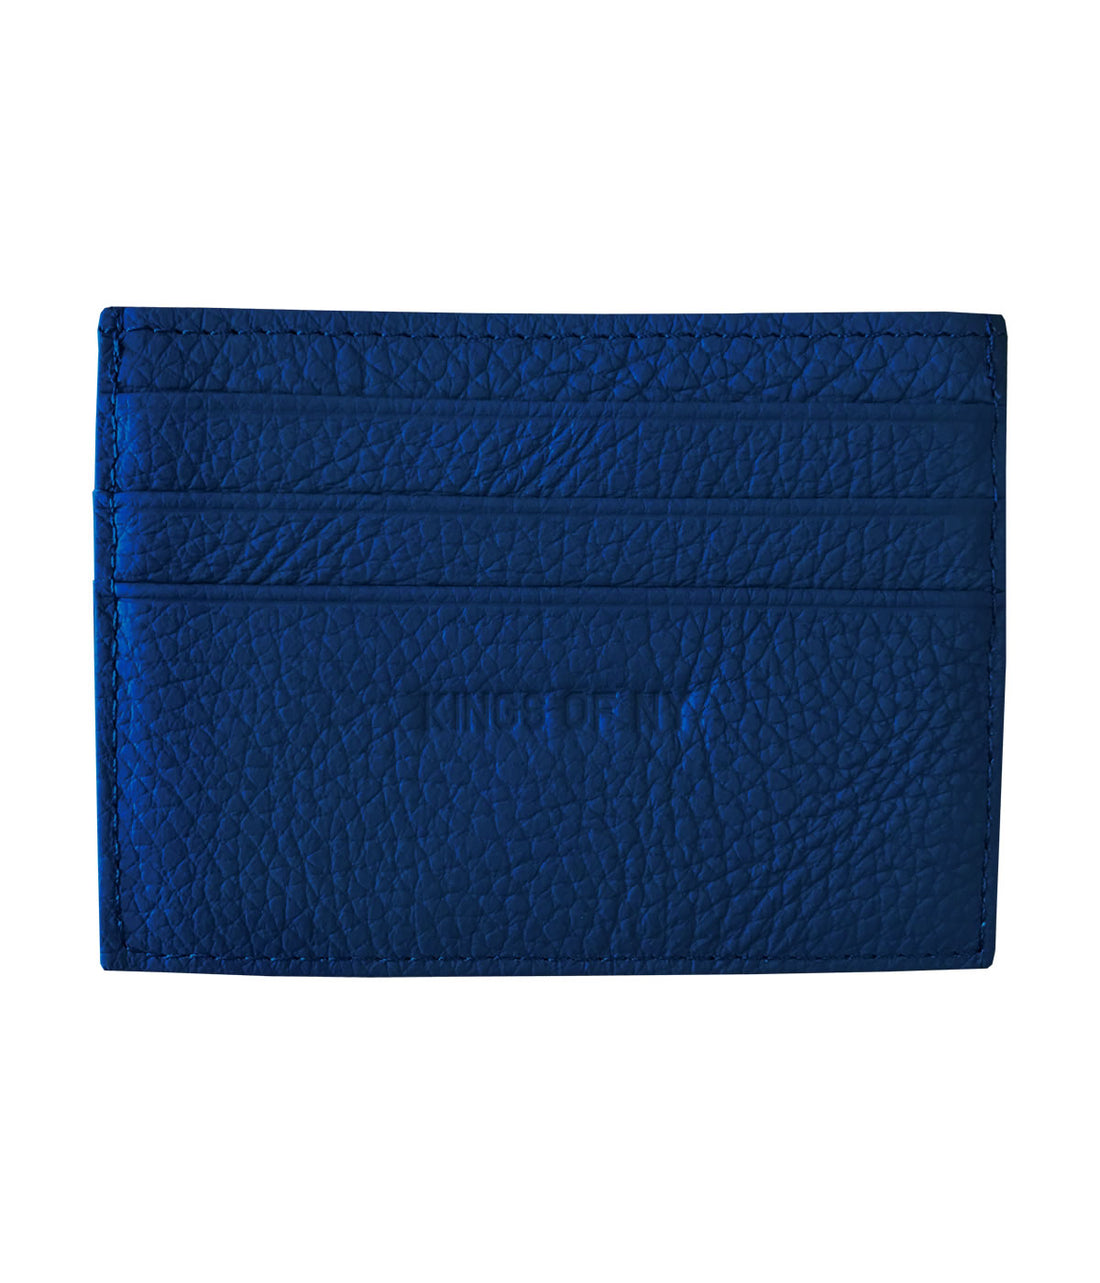 Kings Of NY Pebble Leather Card Holder Wallet Royal Blue